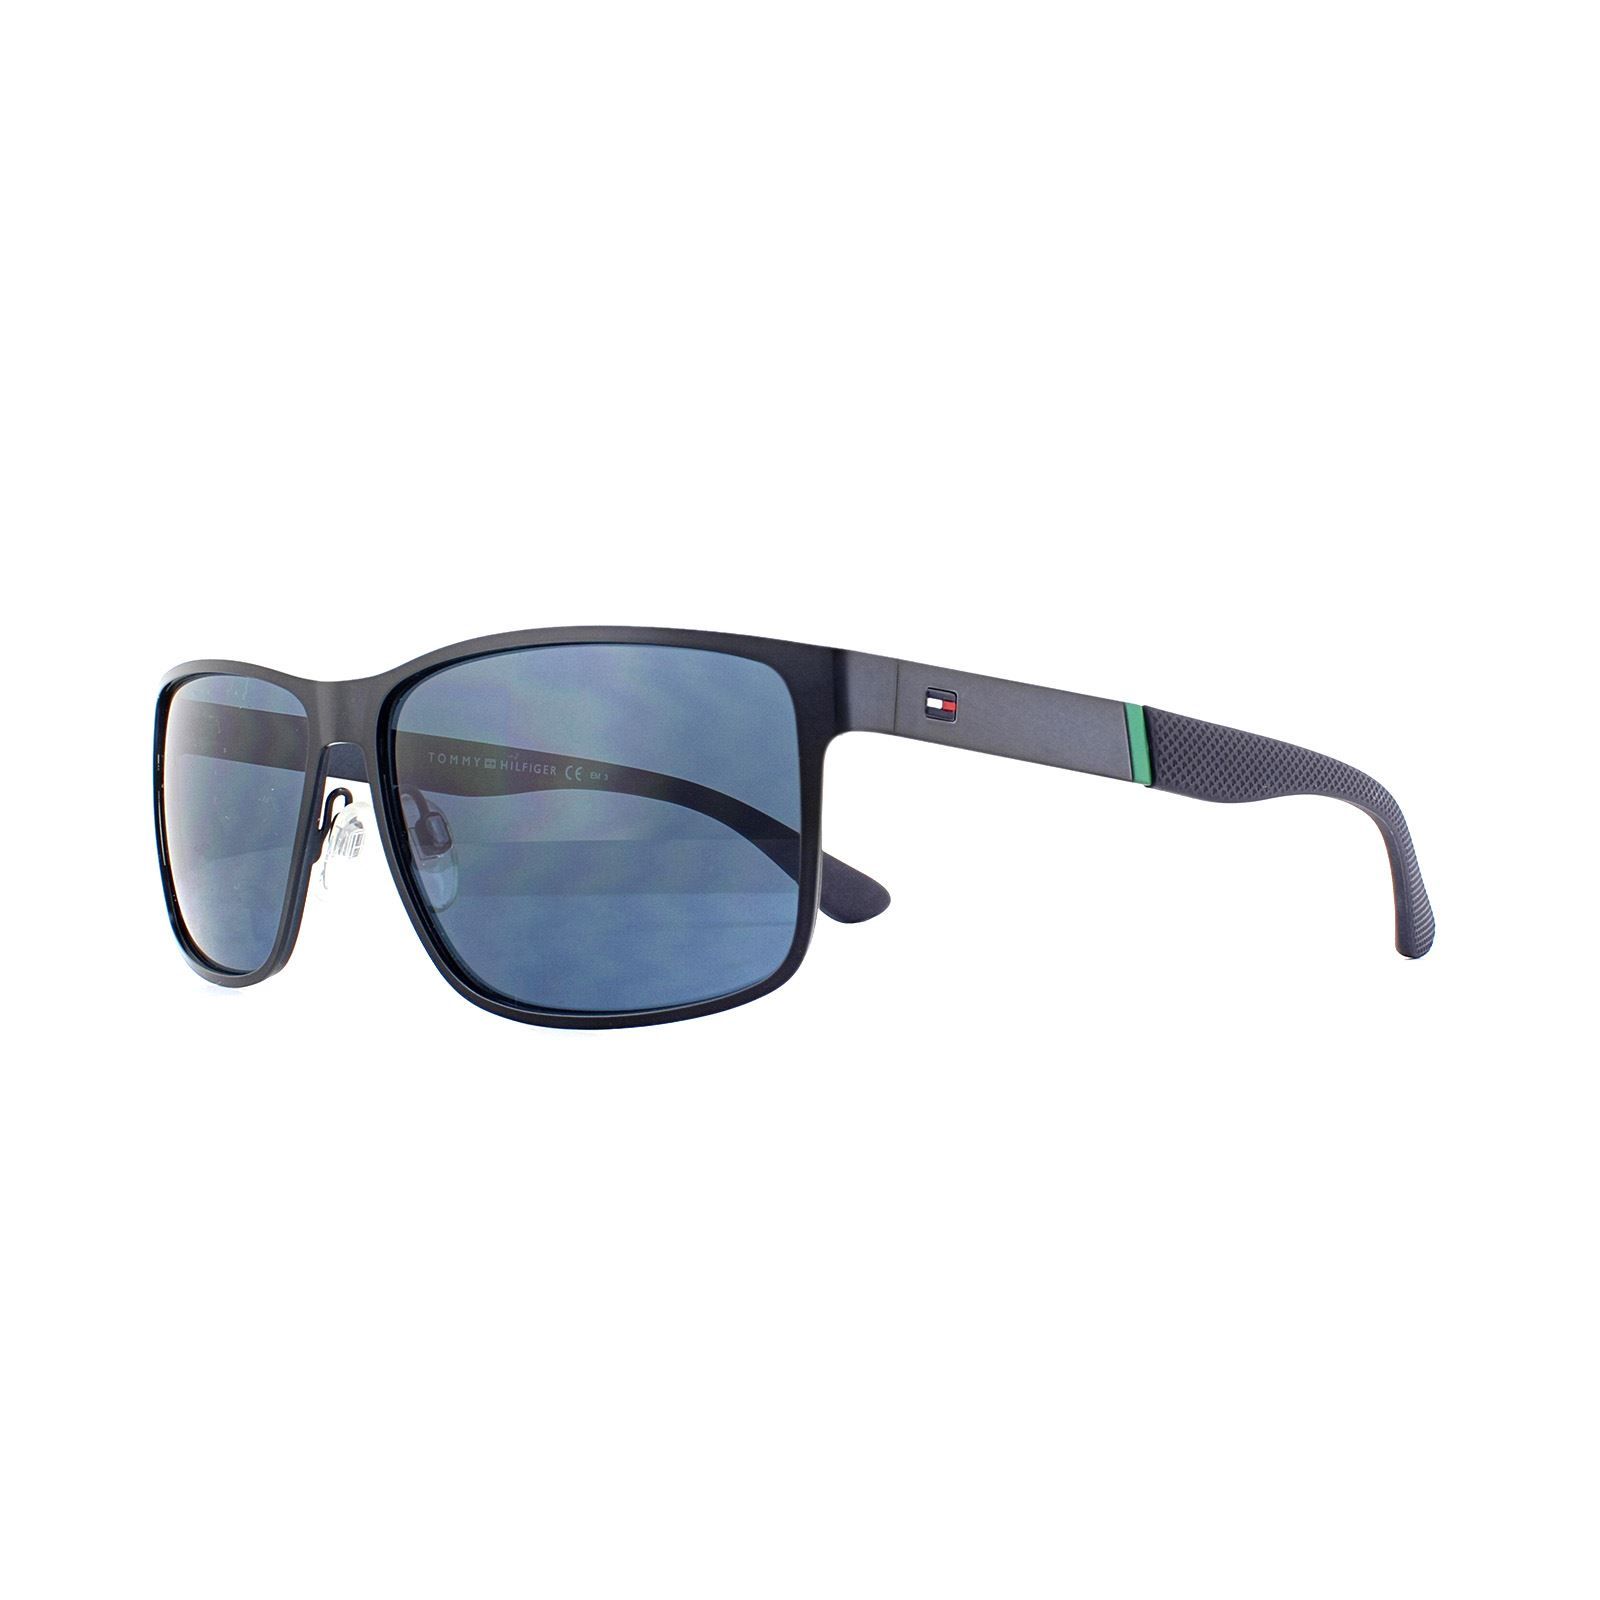 Tommy Hilfiger Sunglasses TH 1542/S FLL KU Matte Blue Blue Avio are a sleek sculptured metal frame which then ends in rubberised temple tips for a flexible comfortable fit.